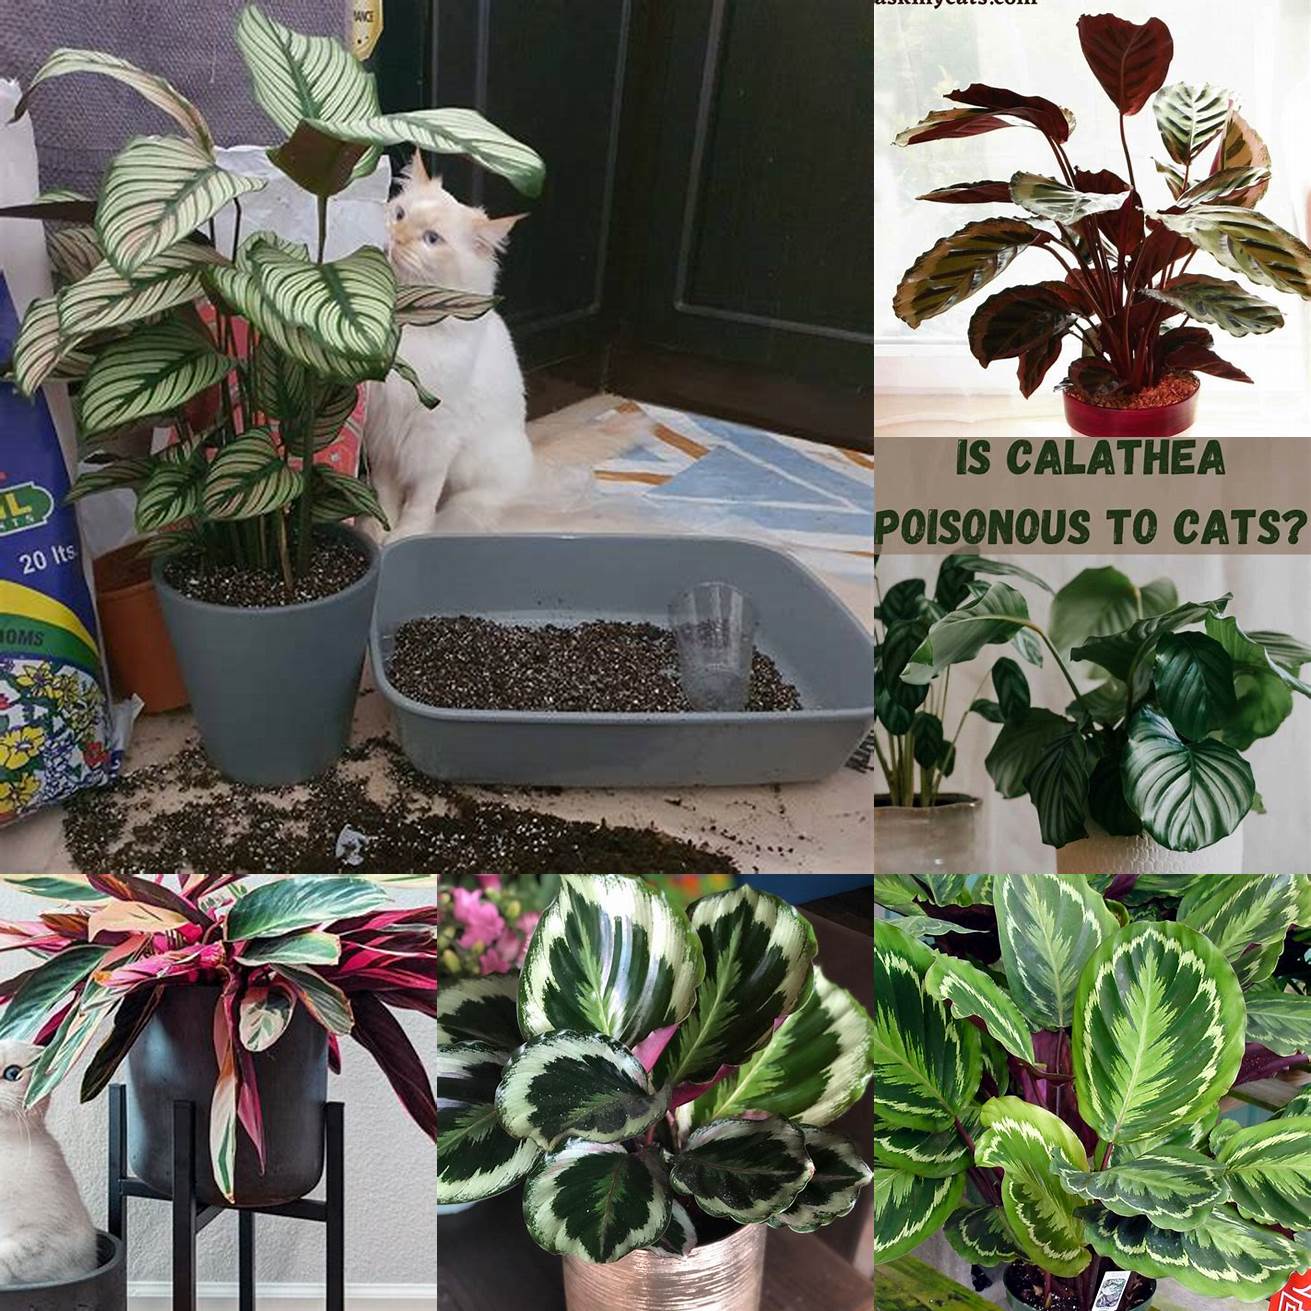 Q Can Calathea cause skin irritation in cats A Calathea can cause skin irritation in cats if they come in contact with the sap of the plant